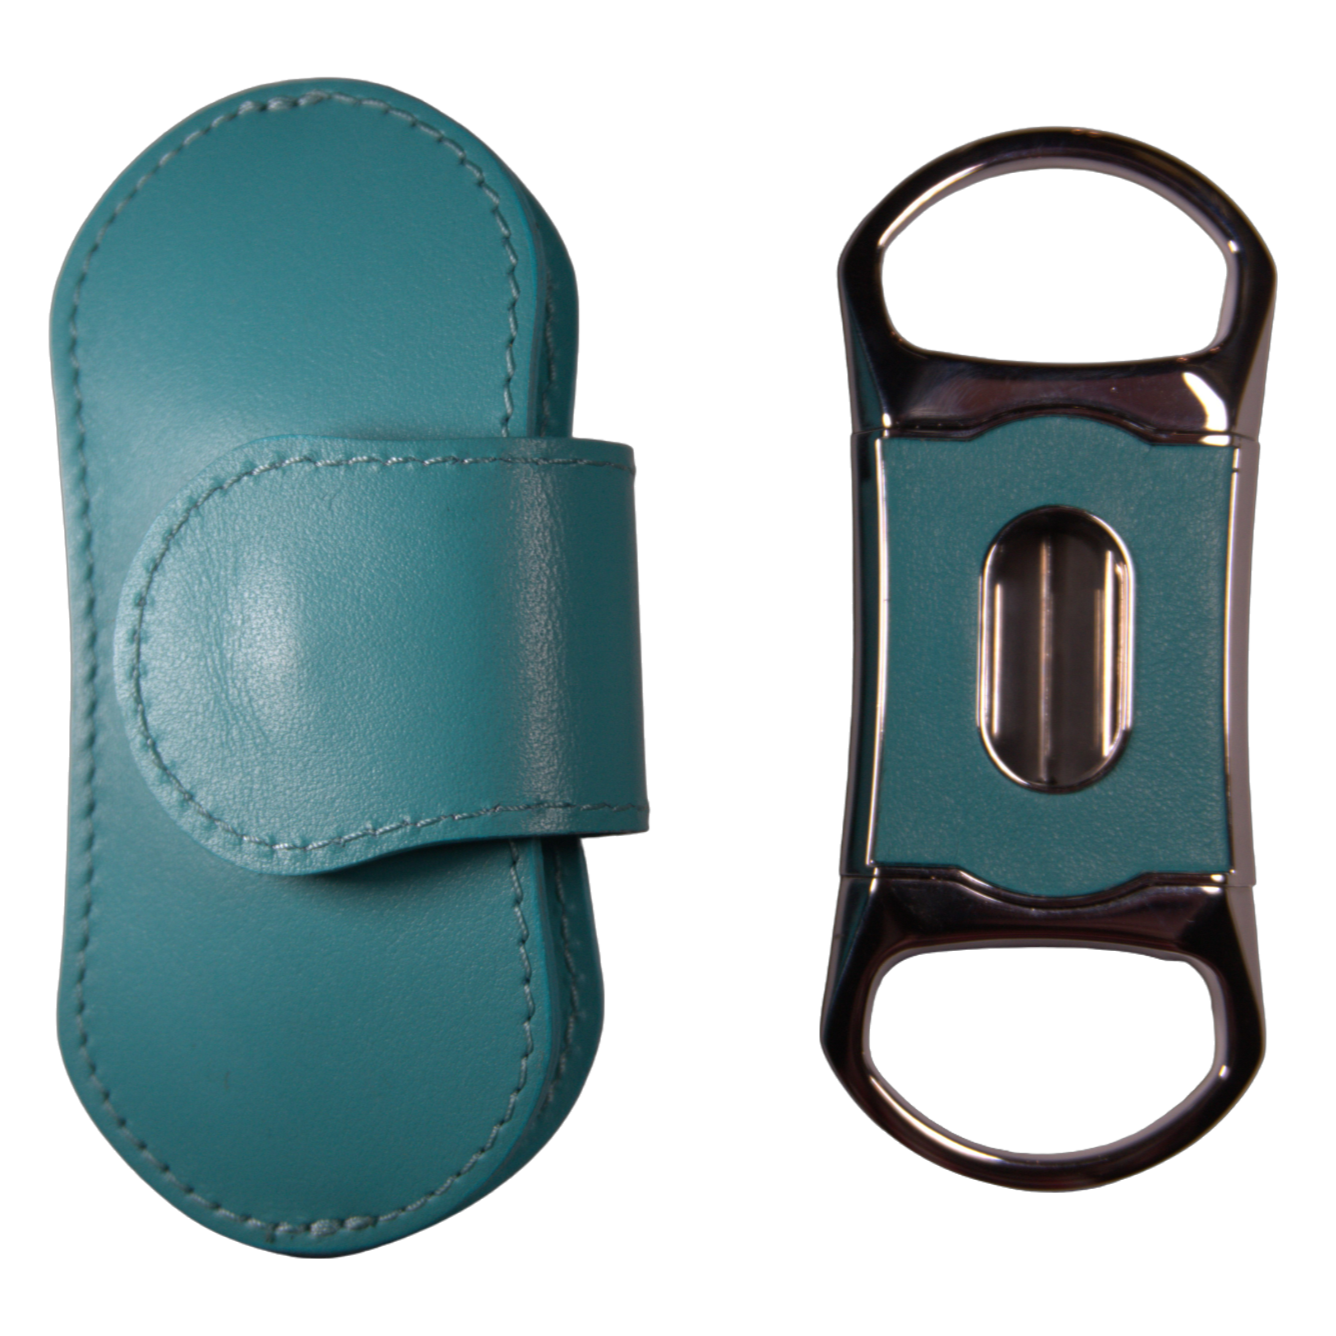 Brizard & Co. The "V" Cigar Cutter - Positano Turquoise & African Mahogany